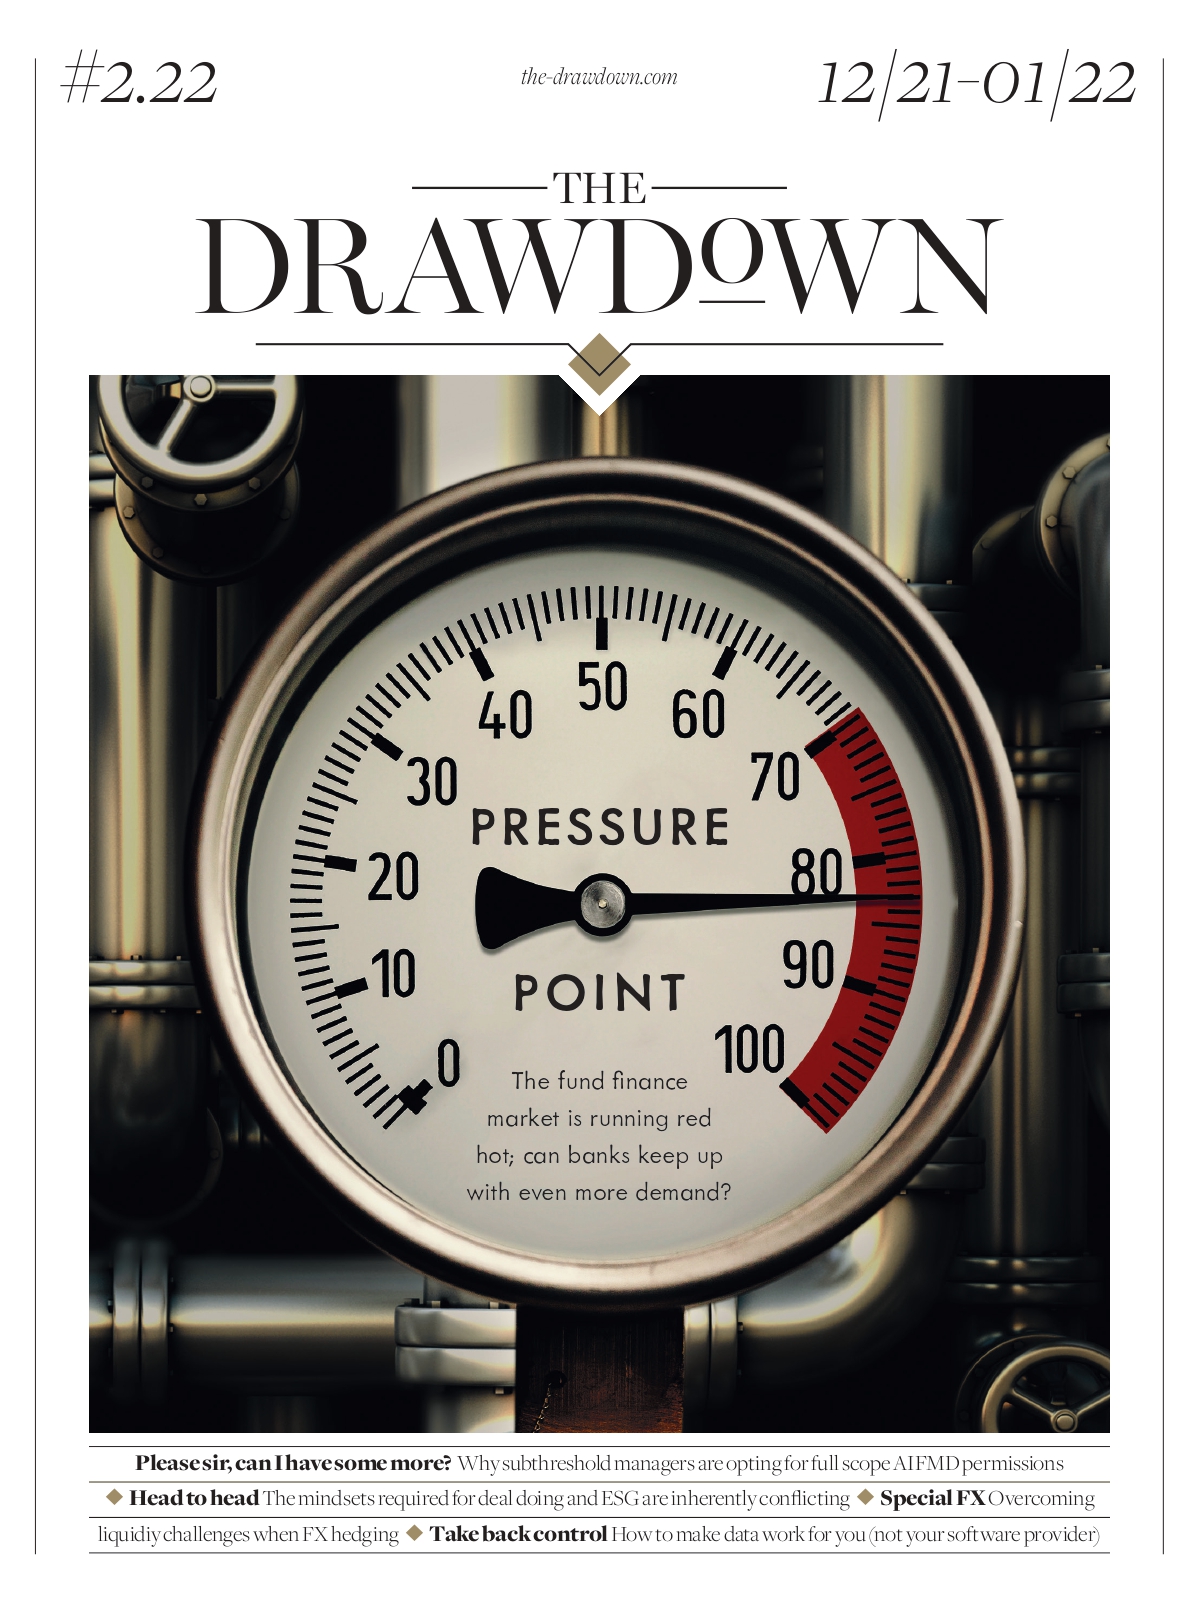 The Drawdown Issue December 2021 / January 2022 Cover